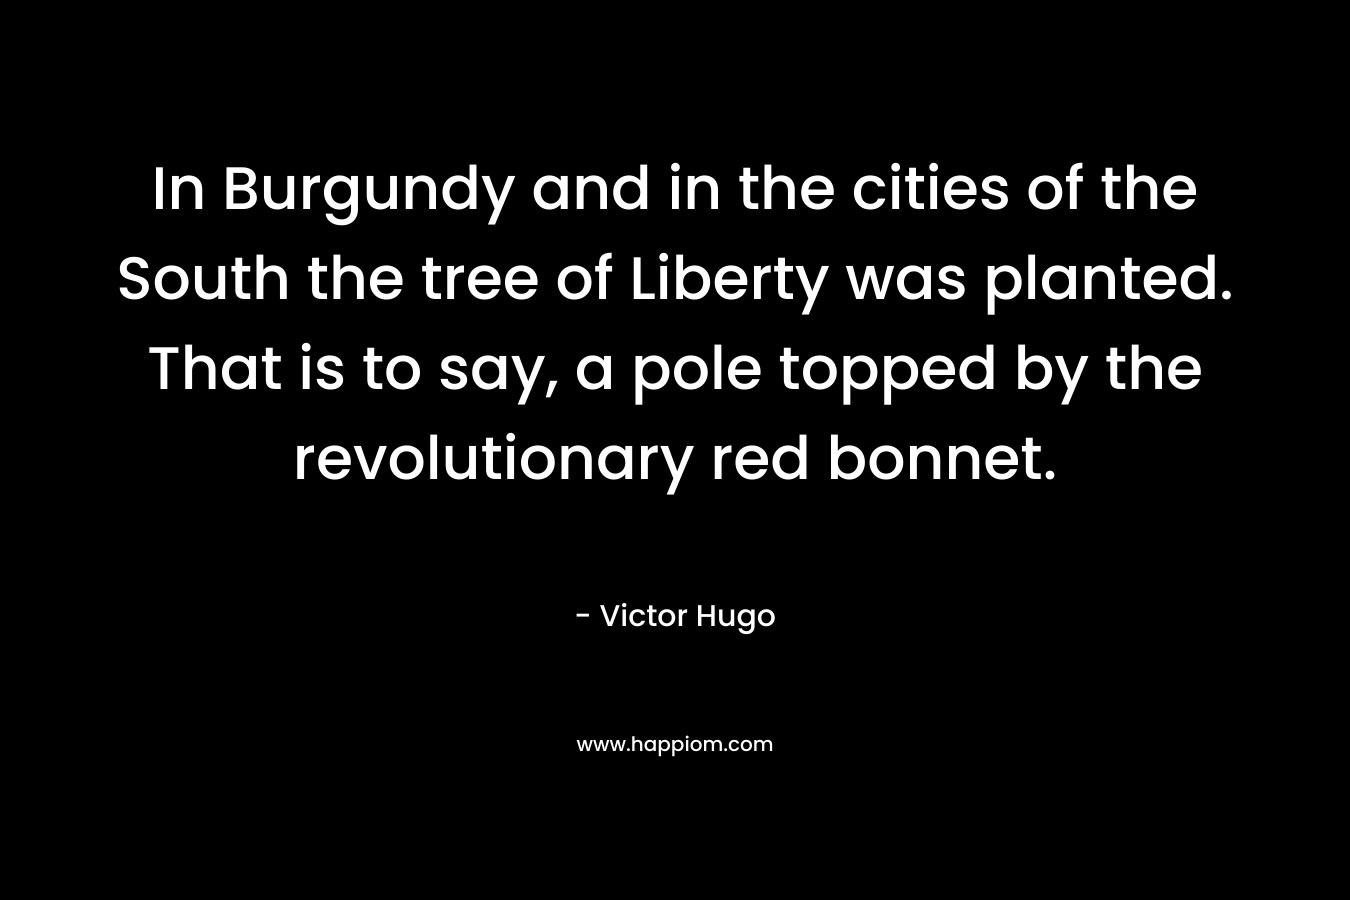 In Burgundy and in the cities of the South the tree of Liberty was planted. That is to say, a pole topped by the revolutionary red bonnet.